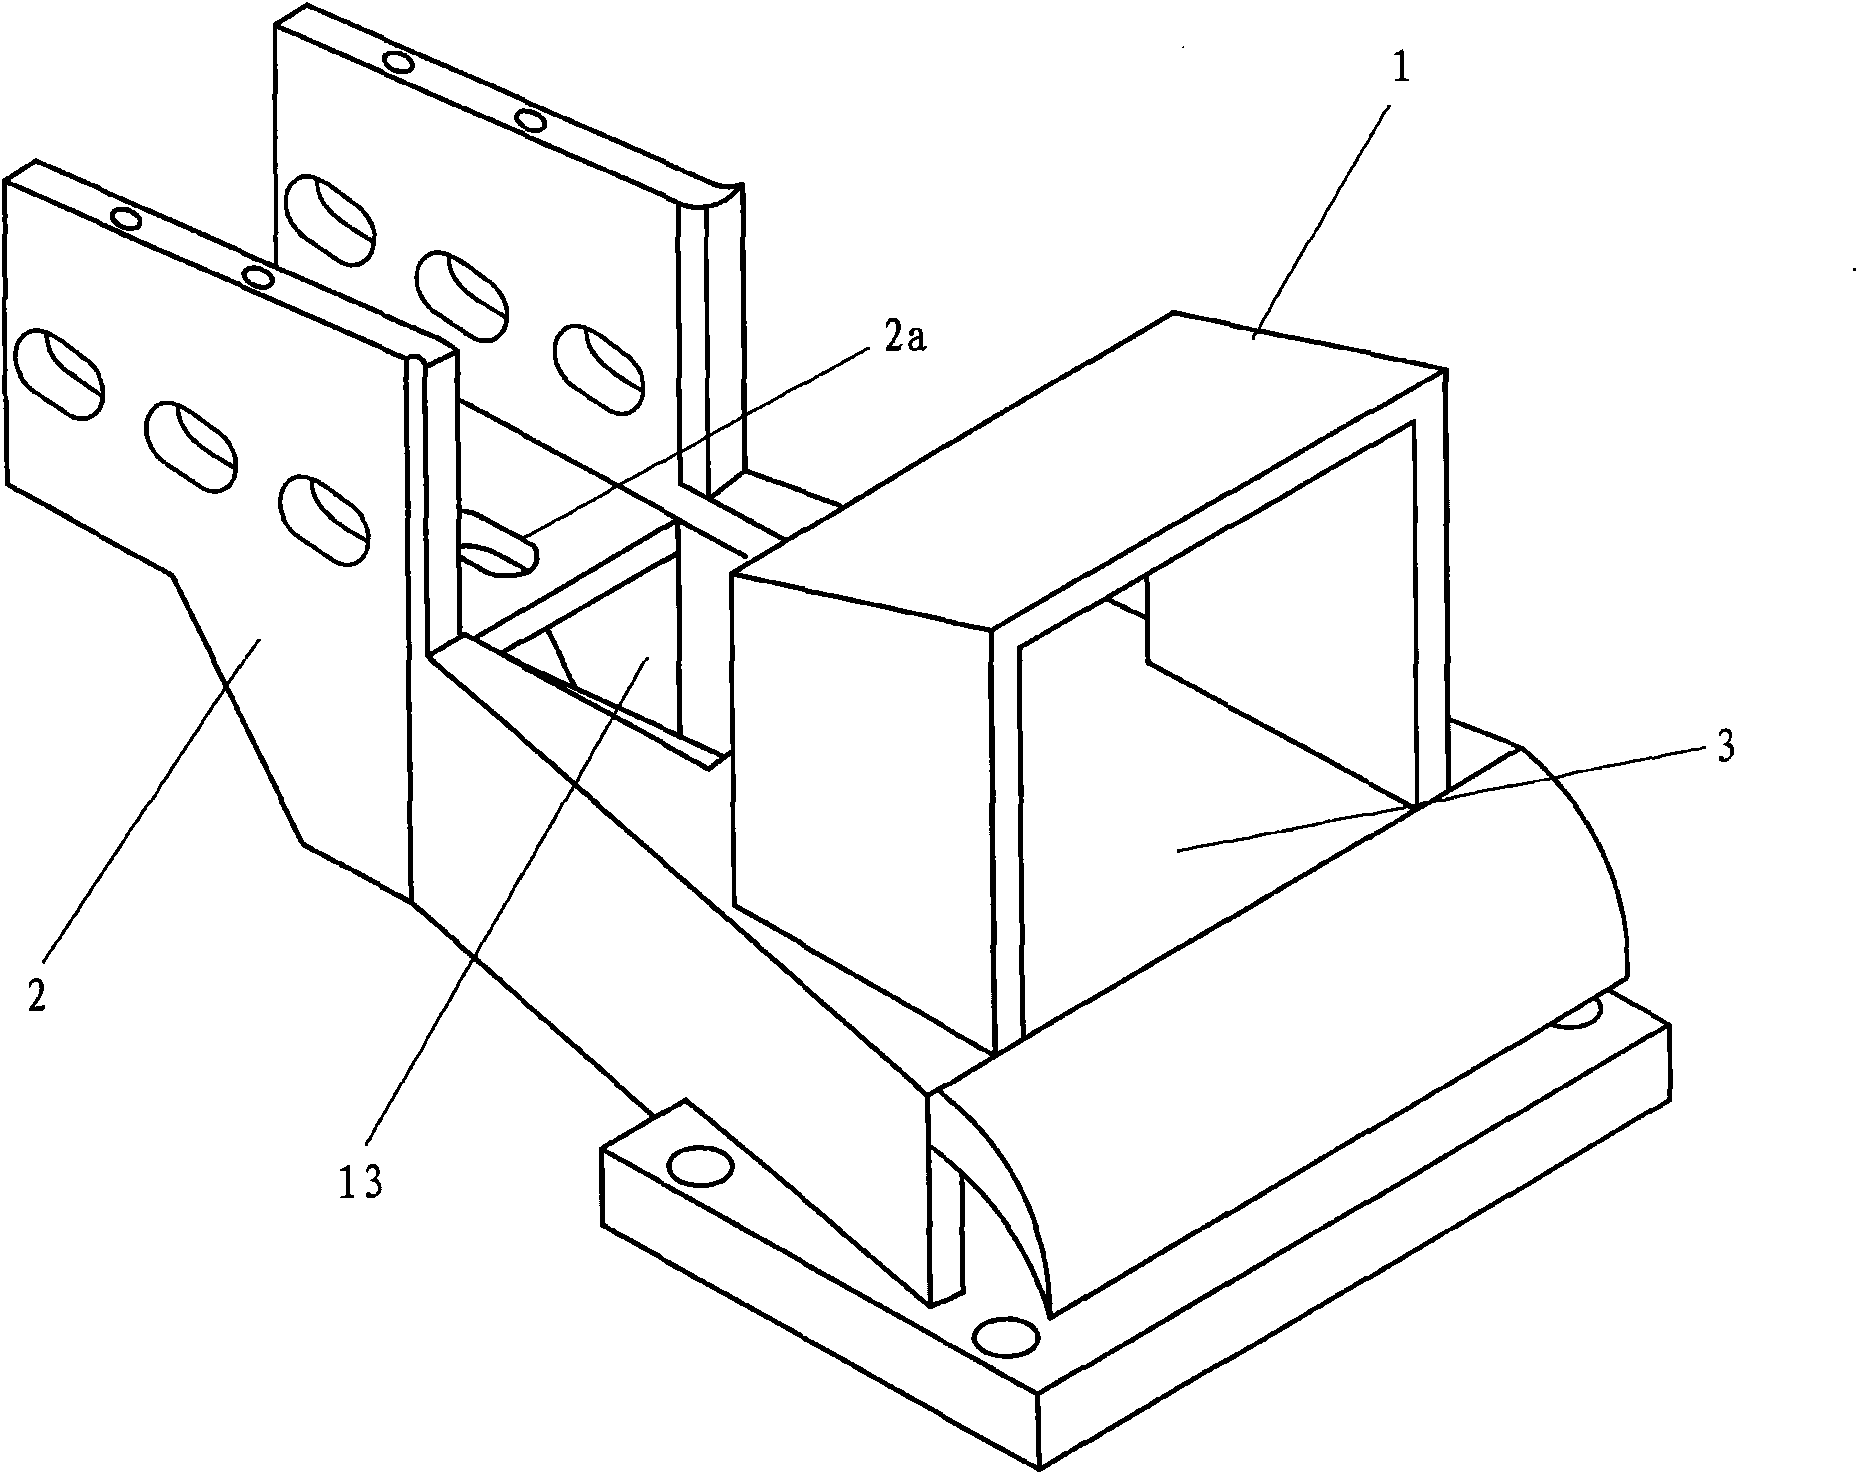 Adjustable combined sliding guiding and guarding device